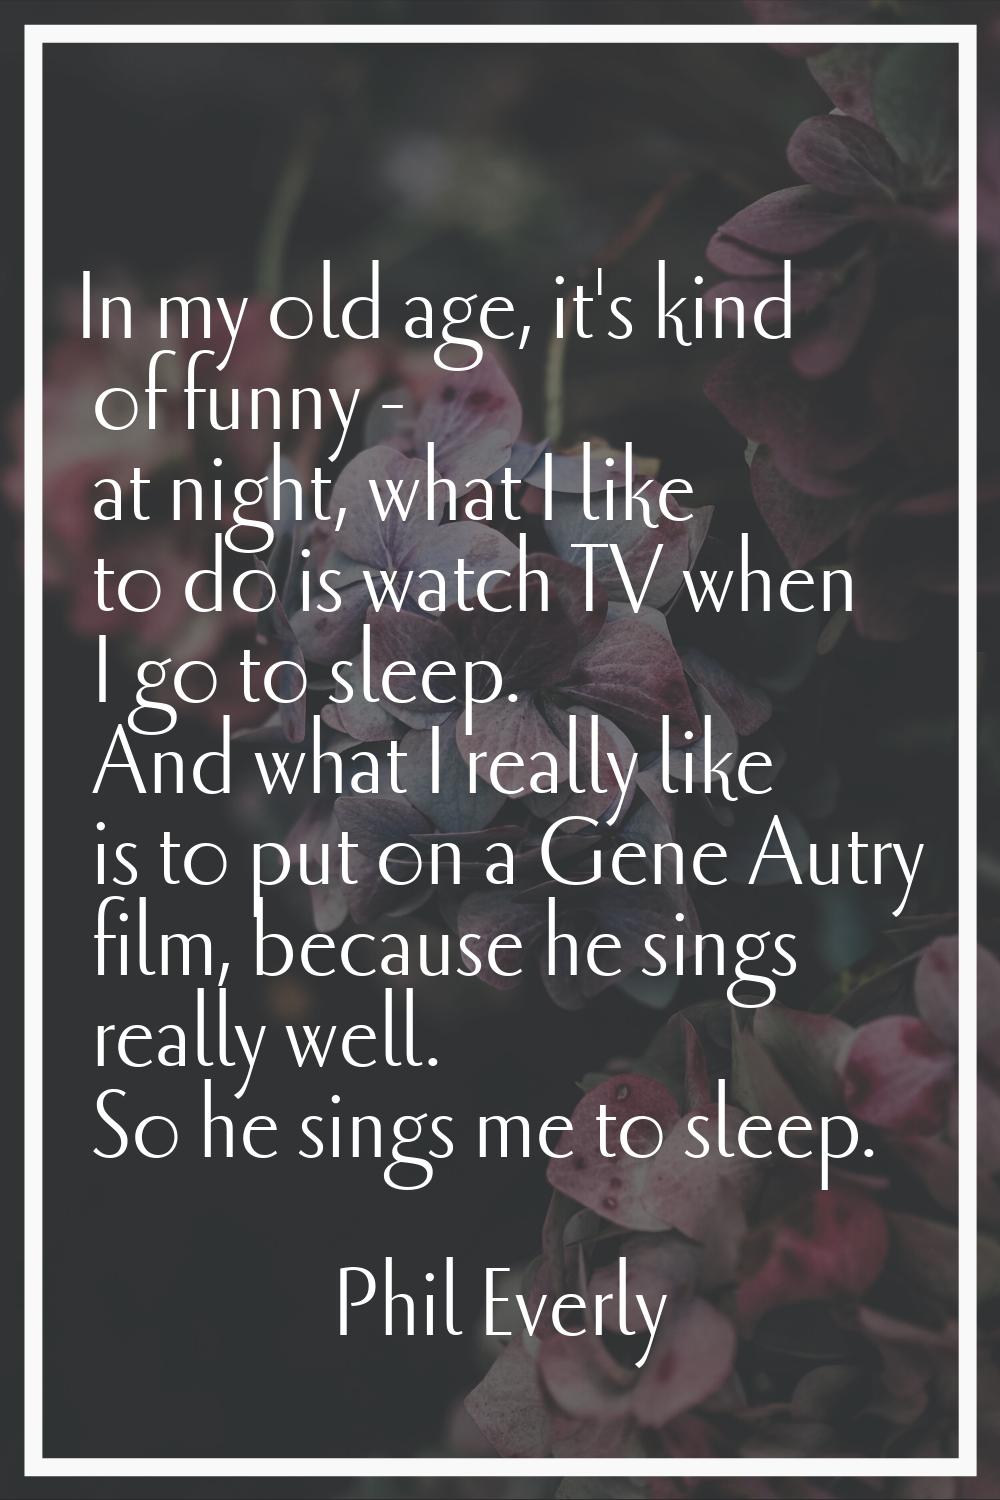 In my old age, it's kind of funny - at night, what I like to do is watch TV when I go to sleep. And